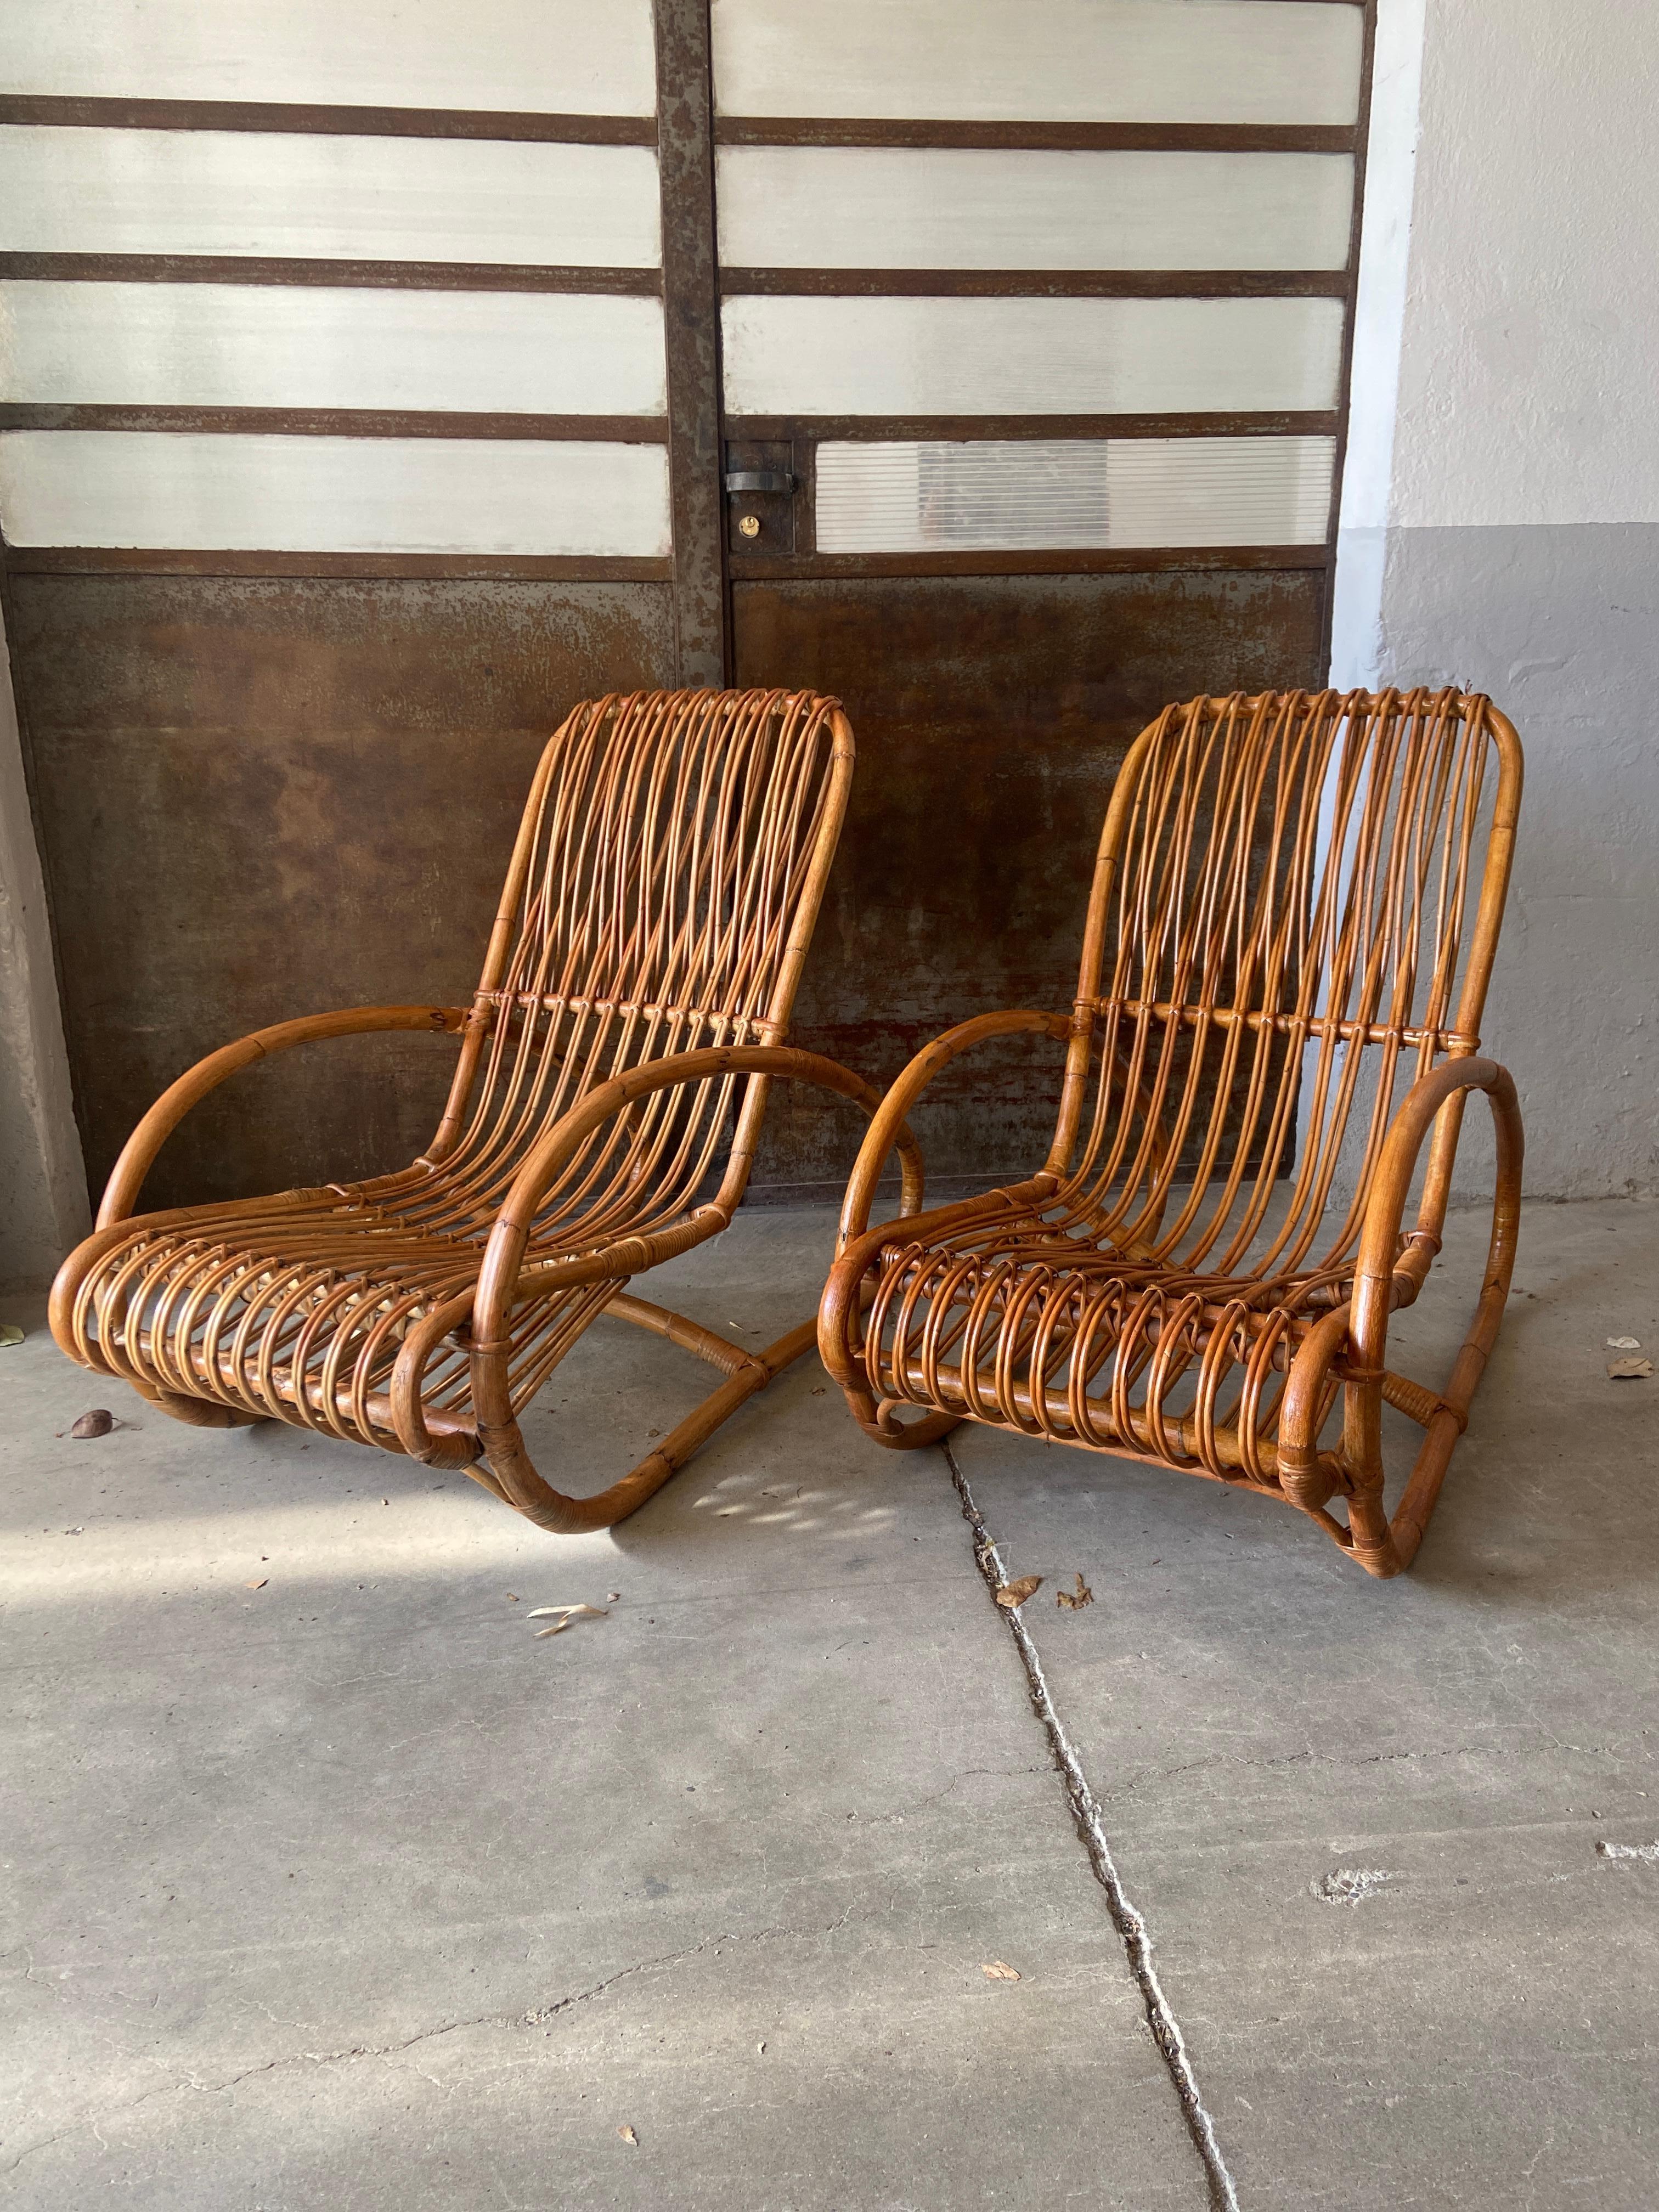 Mid-Century Modern Italian Pair of Bamboo and Rattan Lounge chairs in the style of Bonacina.
The Armchairs are in really good vintage condition and have a beautiful patina due to age and use.